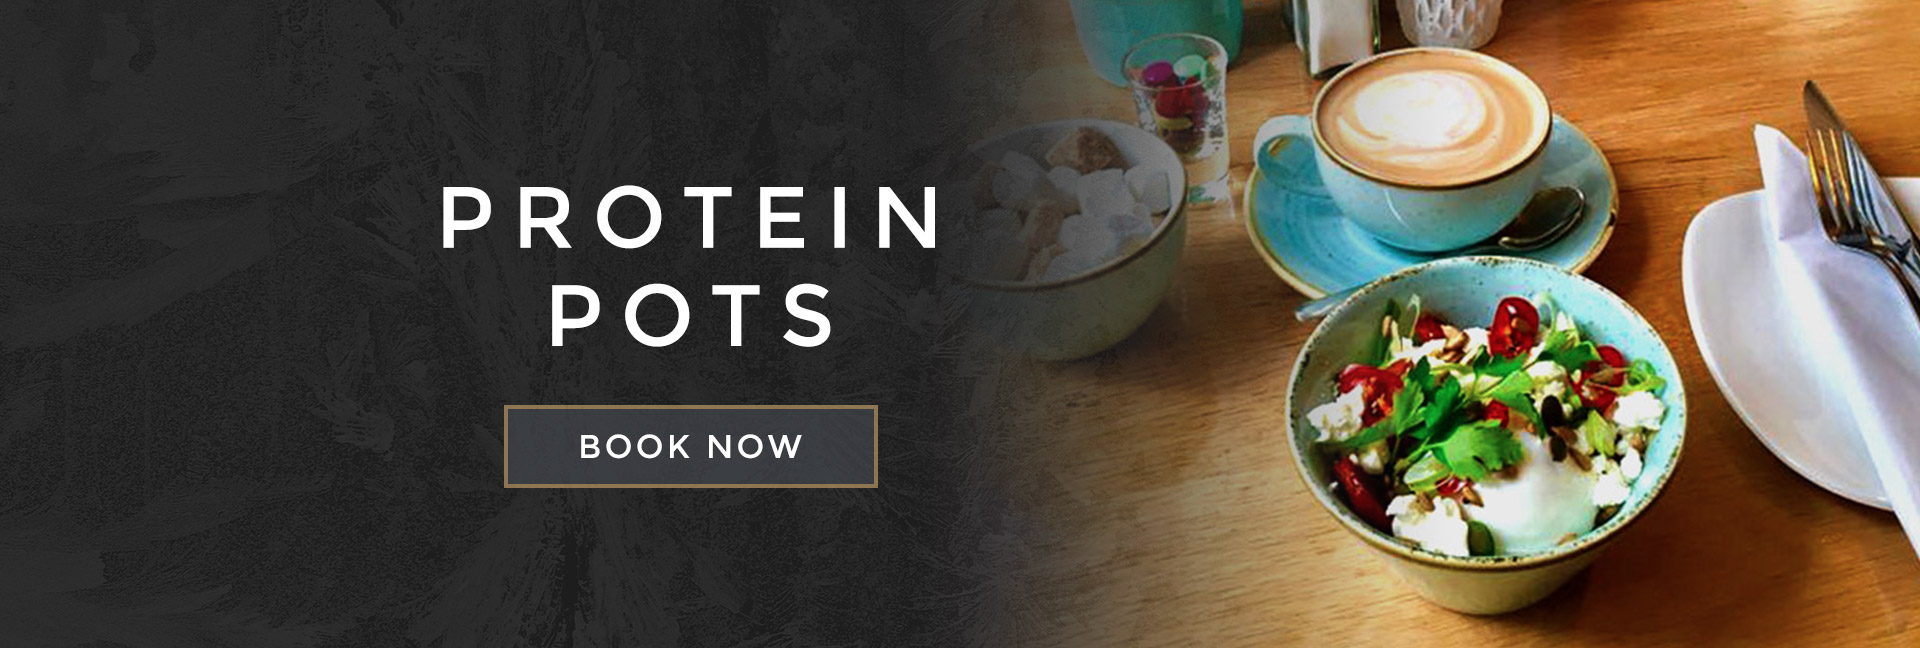 Protein pots at All Bar One Bath - Book your table